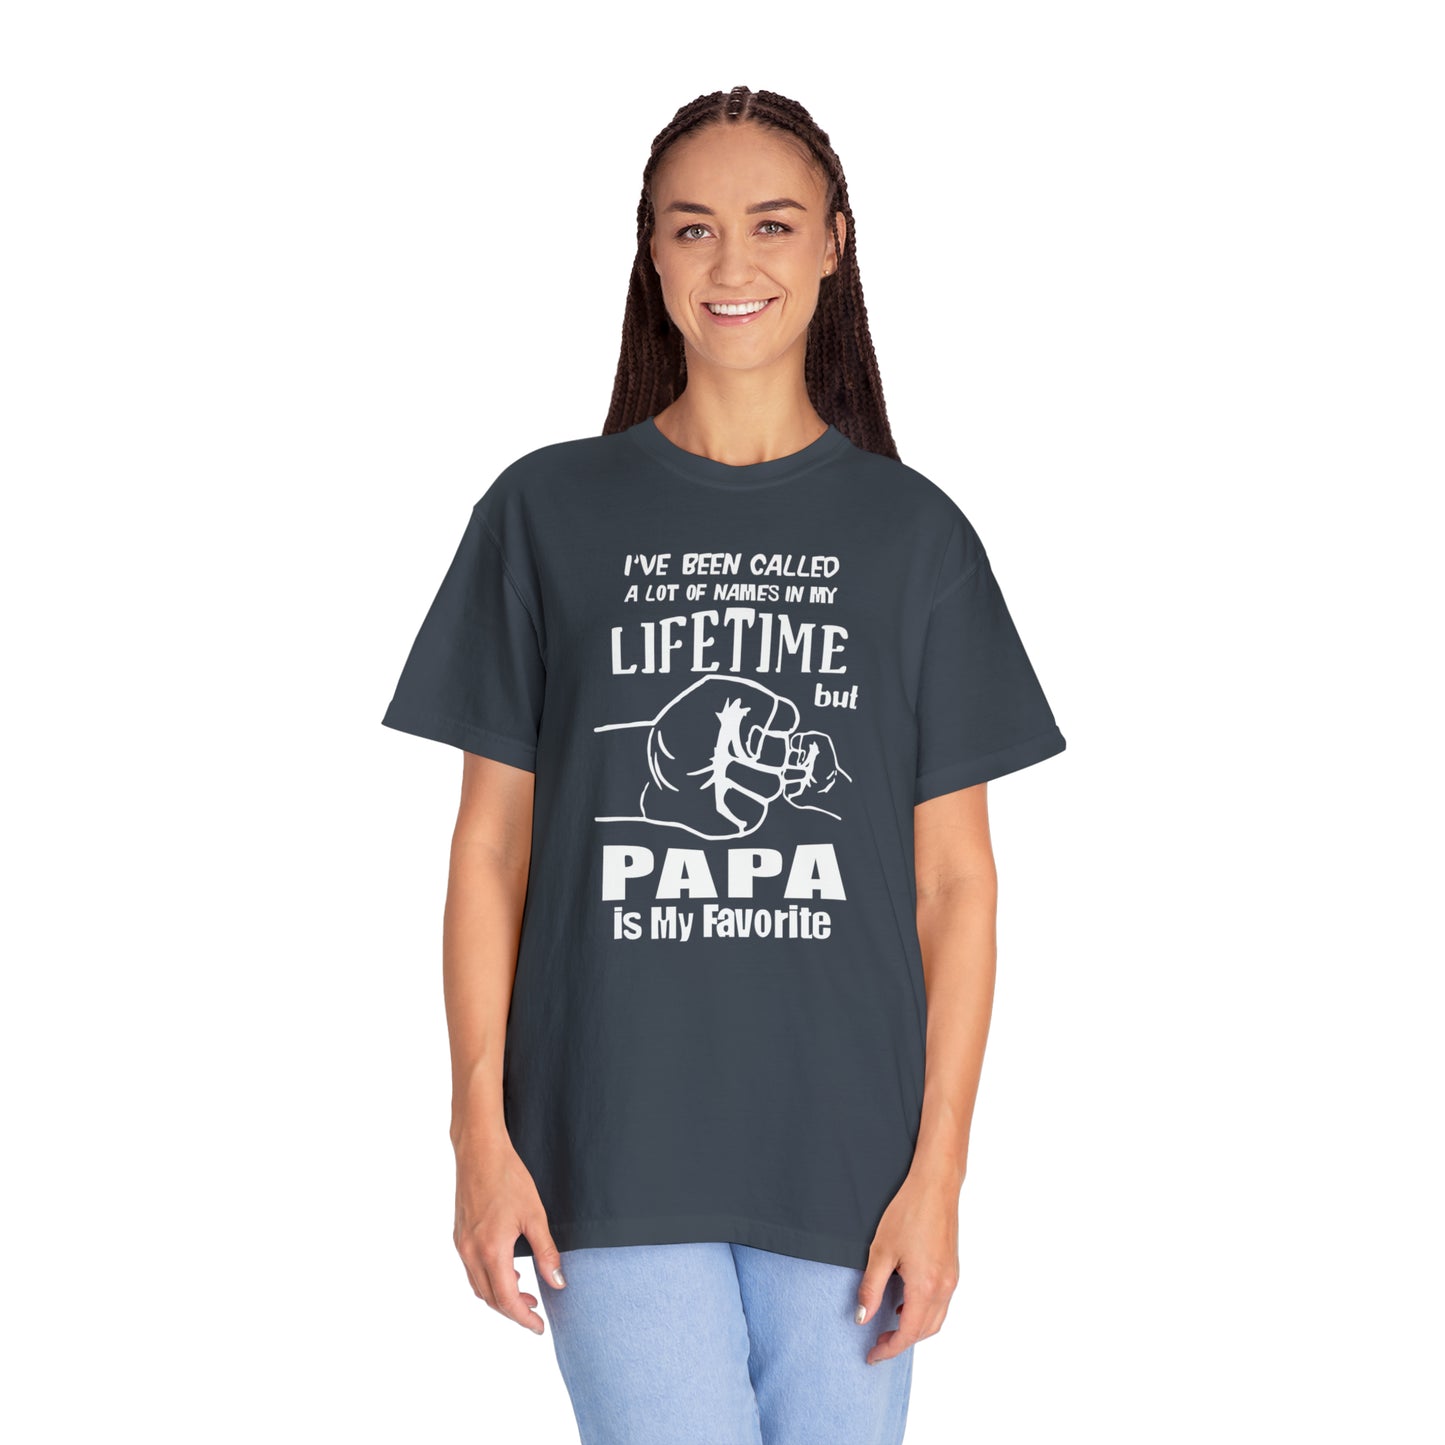 Cherished Title: The Papa T-Shirt for Grandfathers and Father Figures